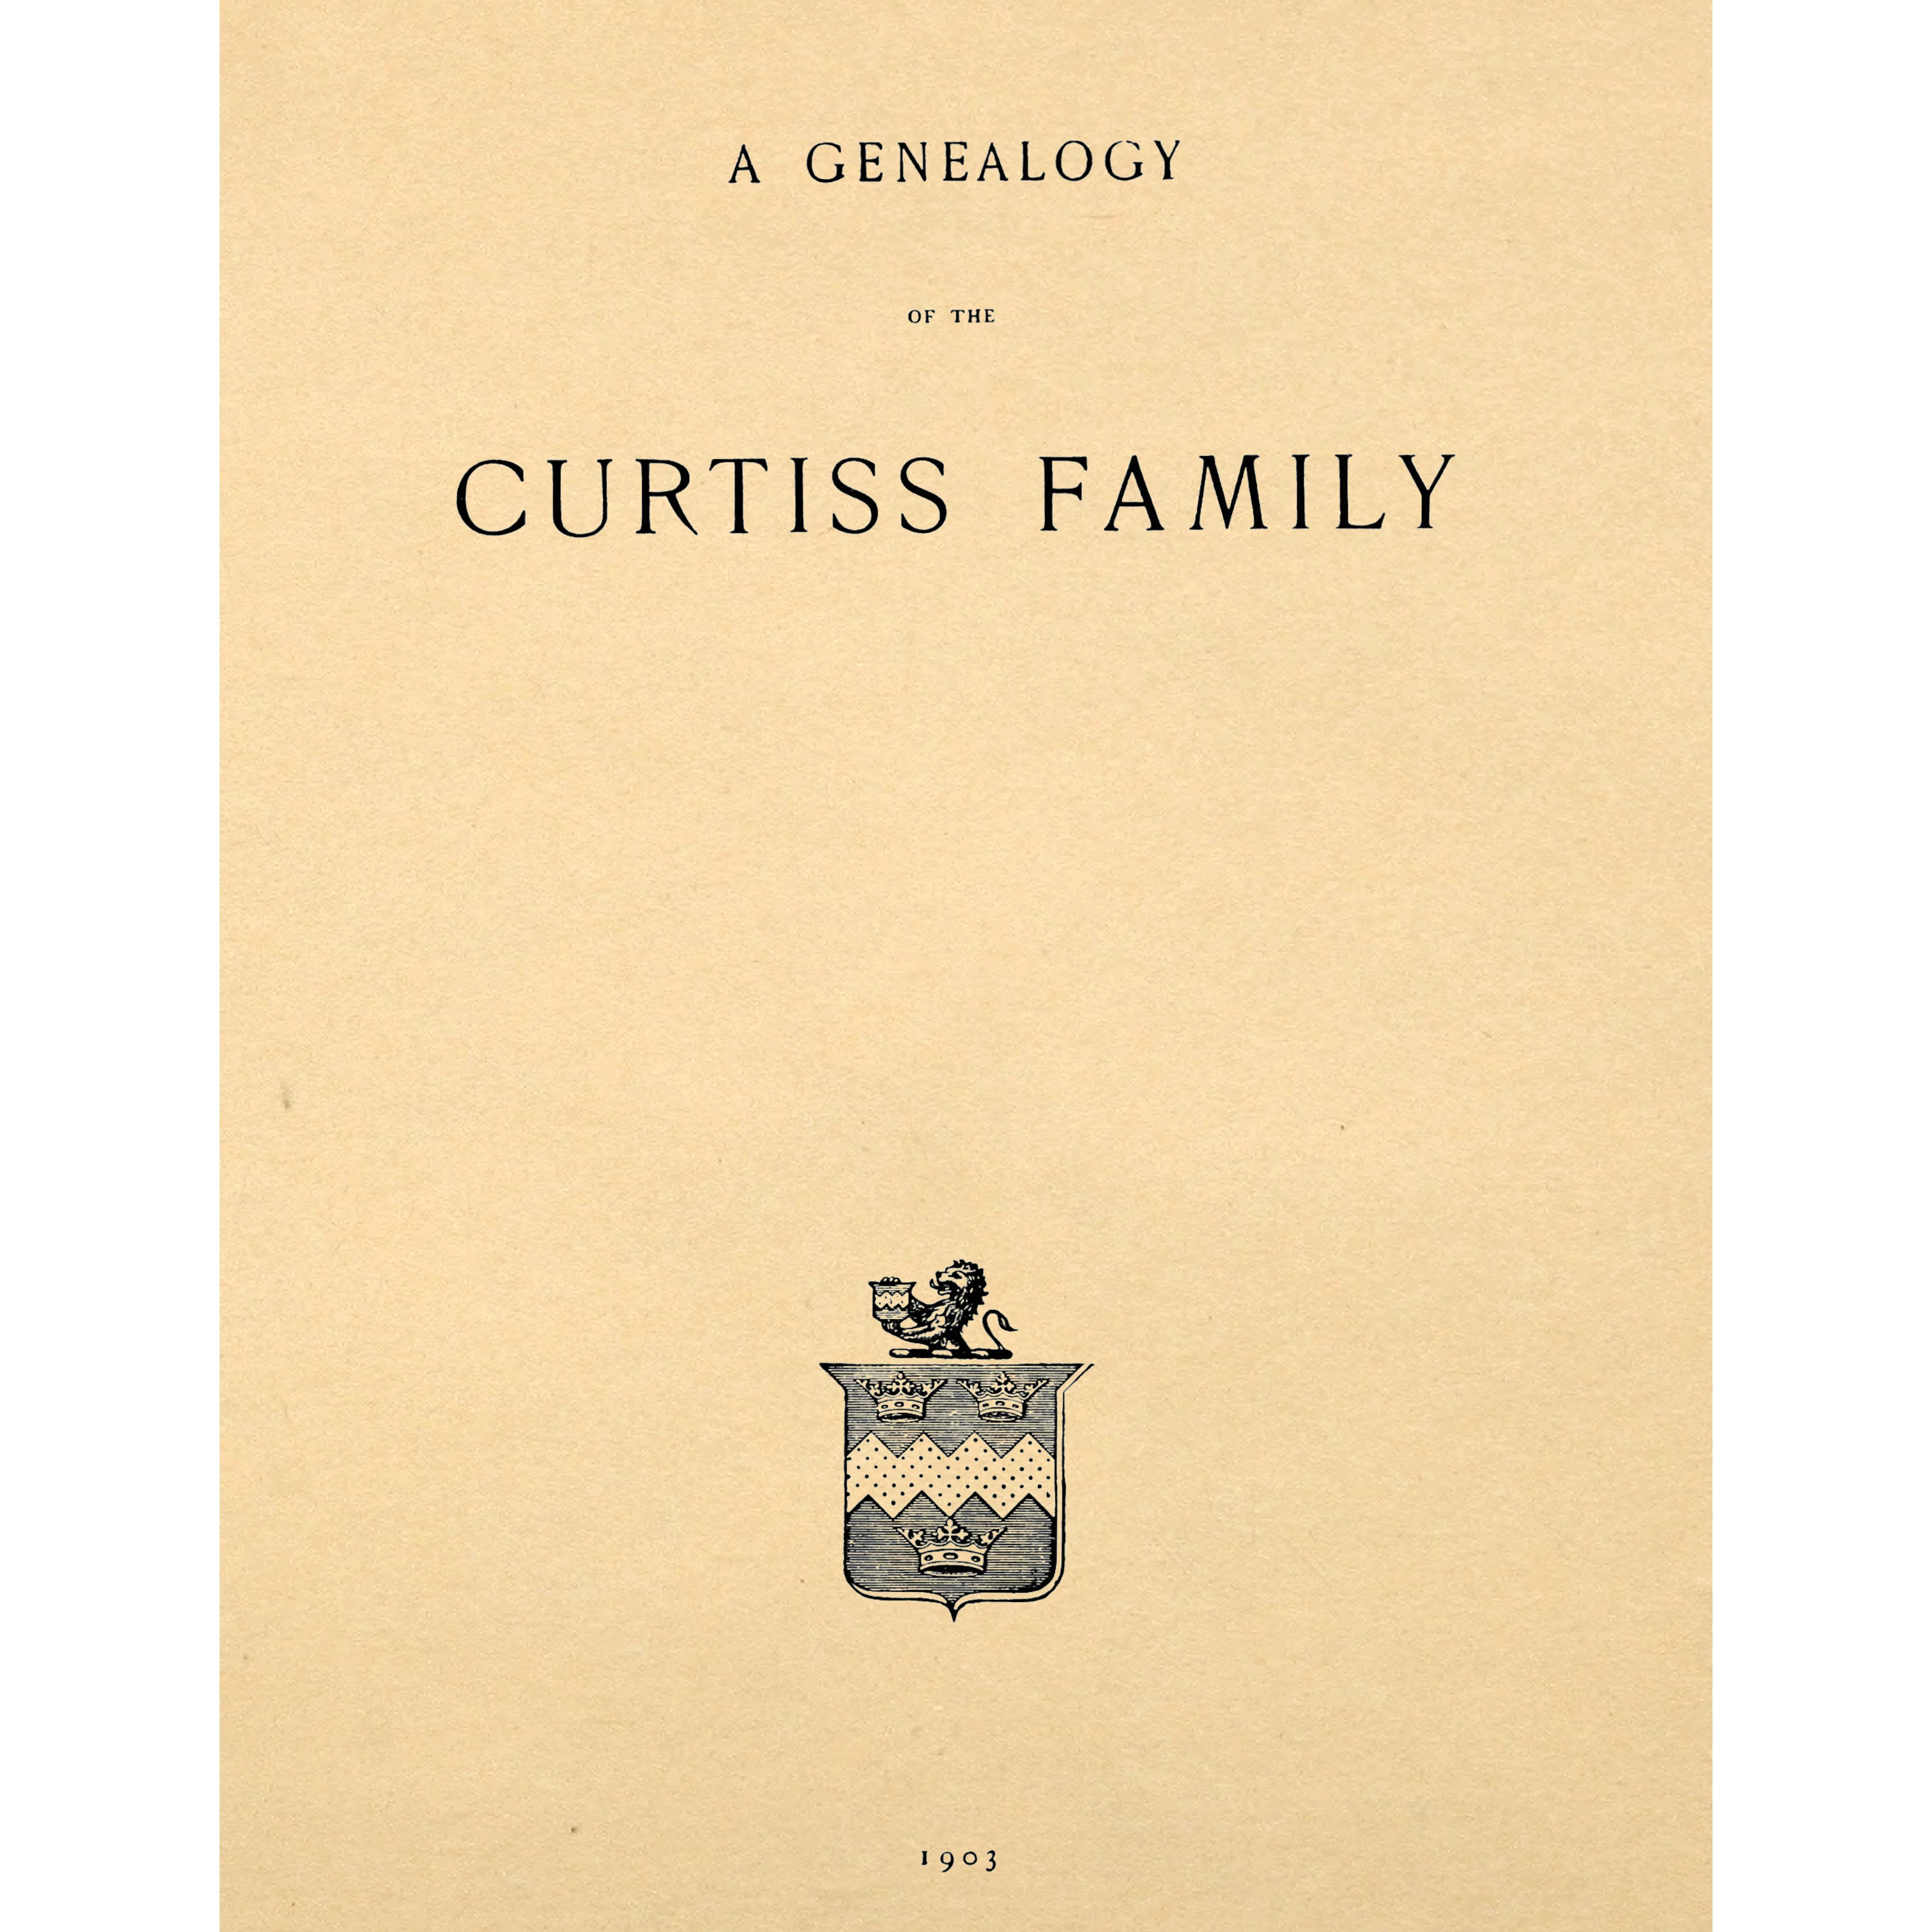 A Genealogy of the Curtiss Family